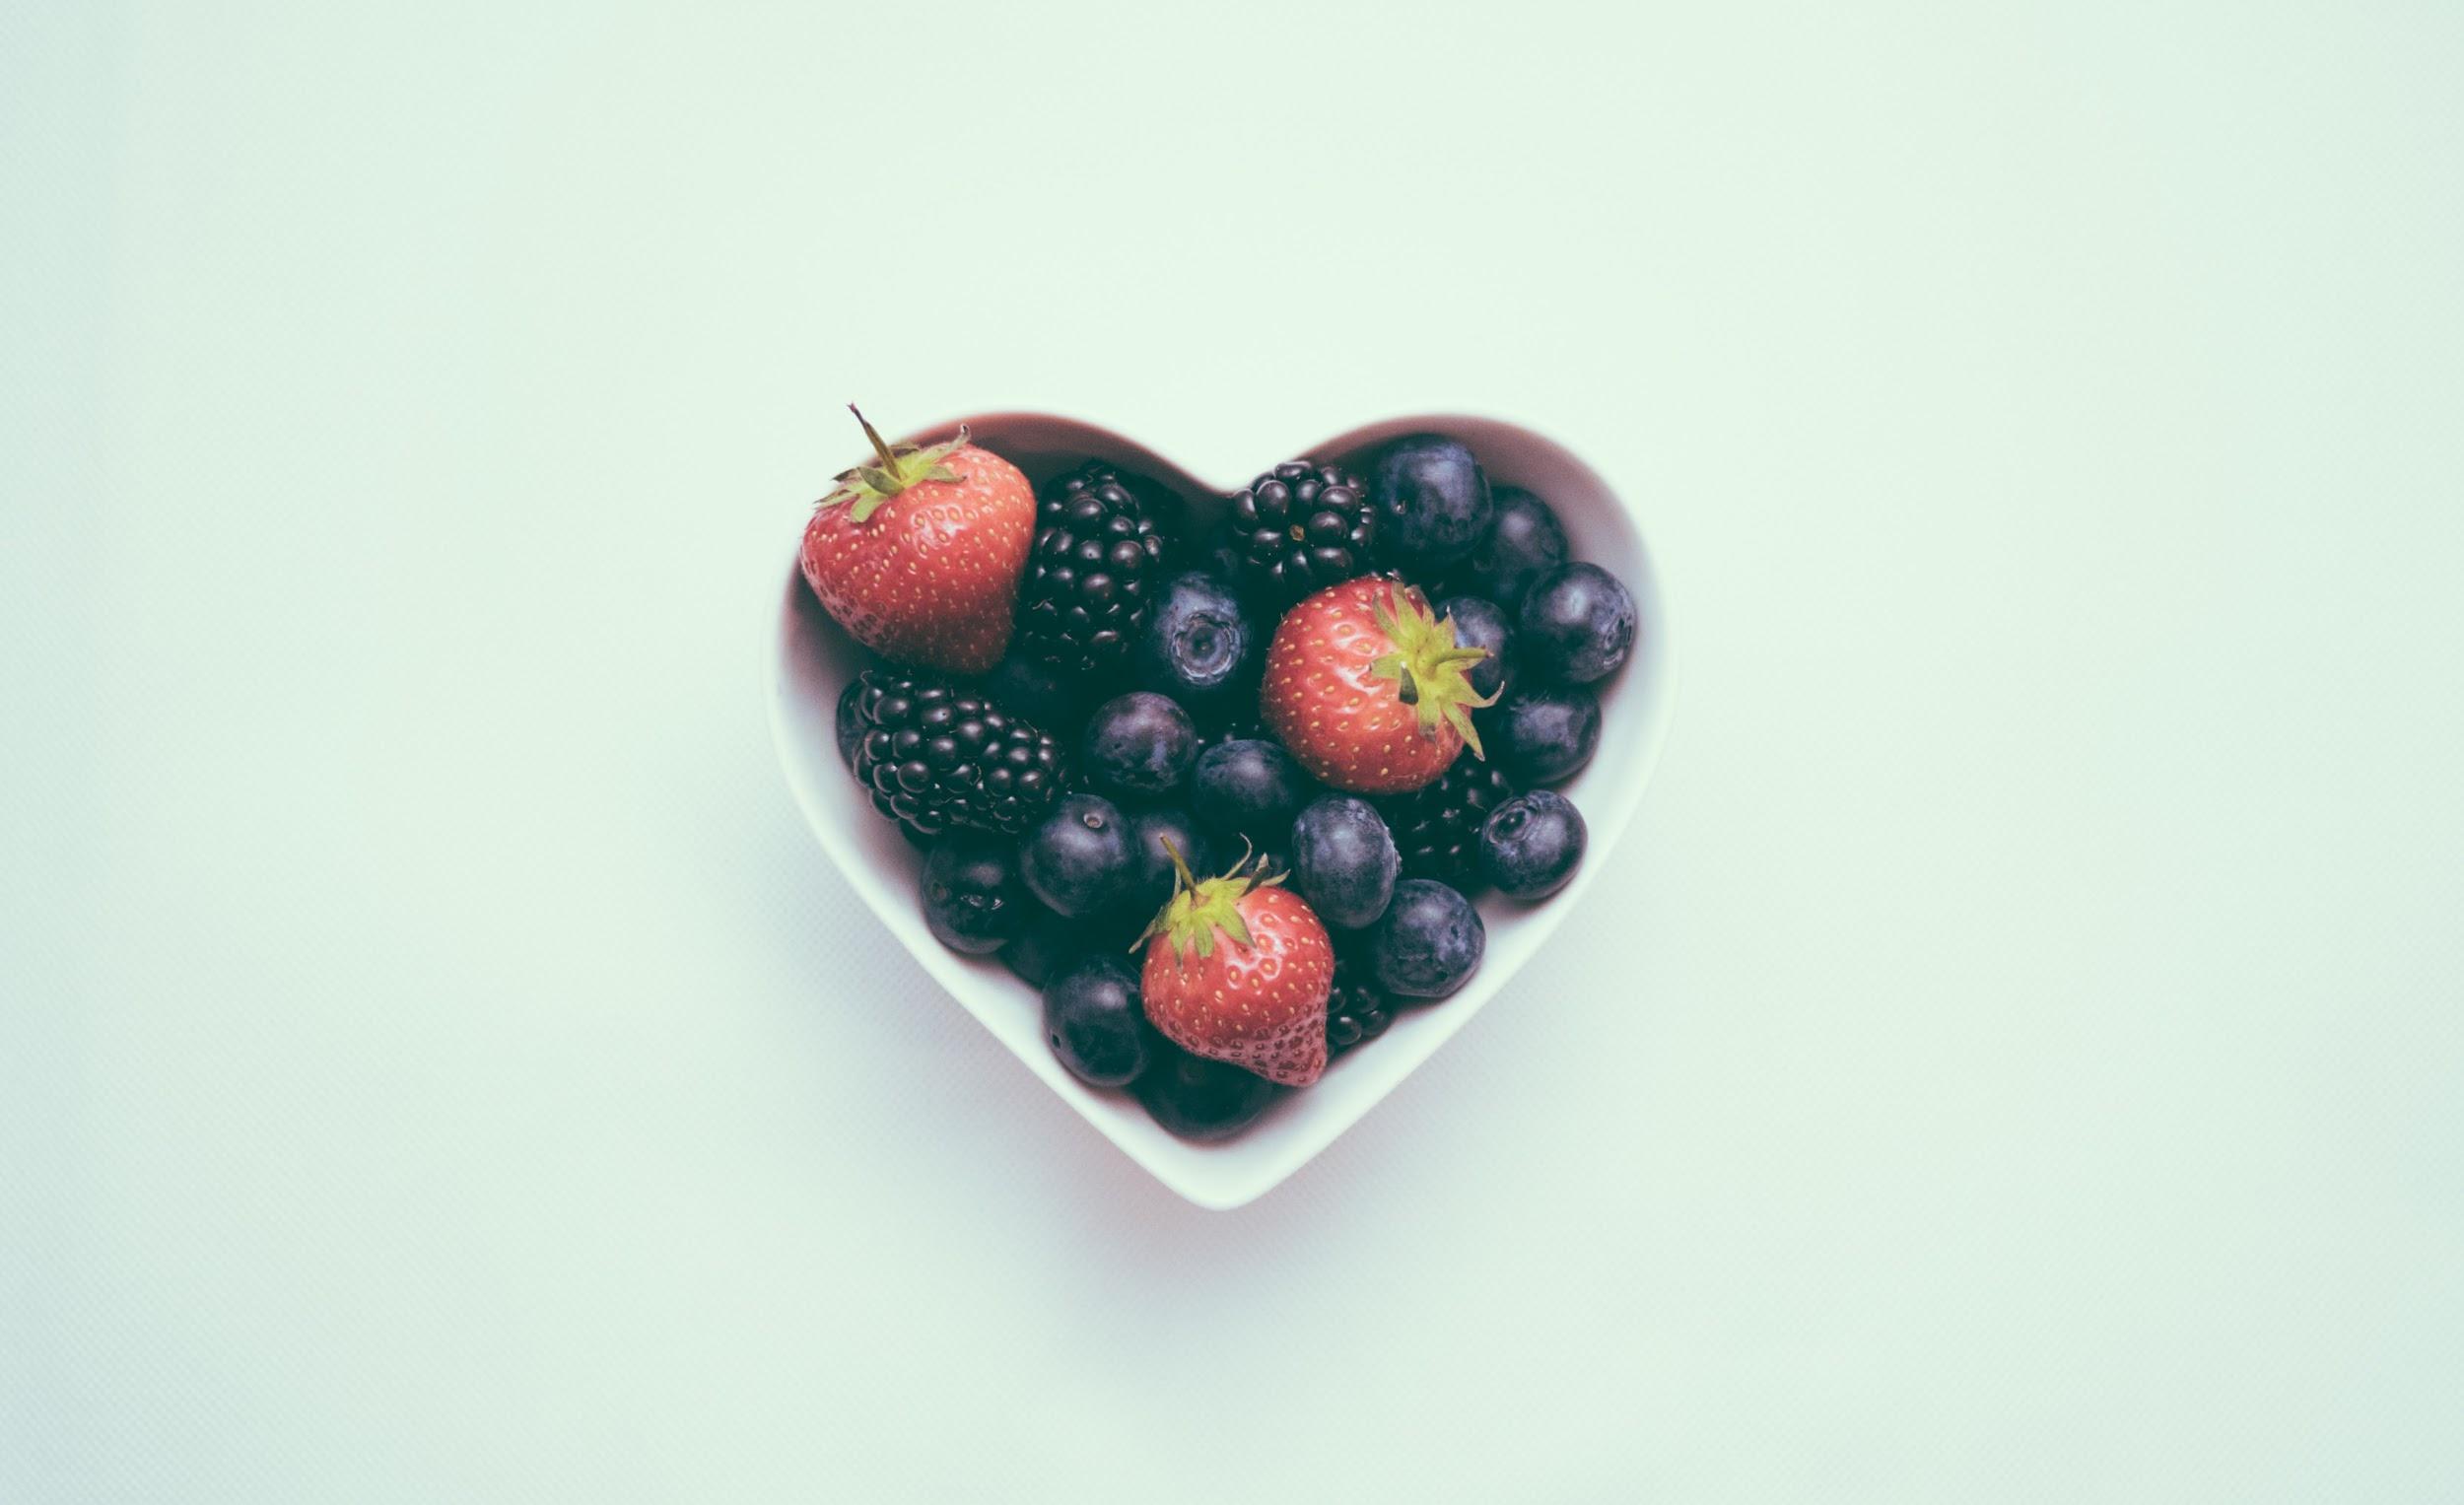 A white heart-shaped bowl filled with blackberries, blueberries, and strawberries